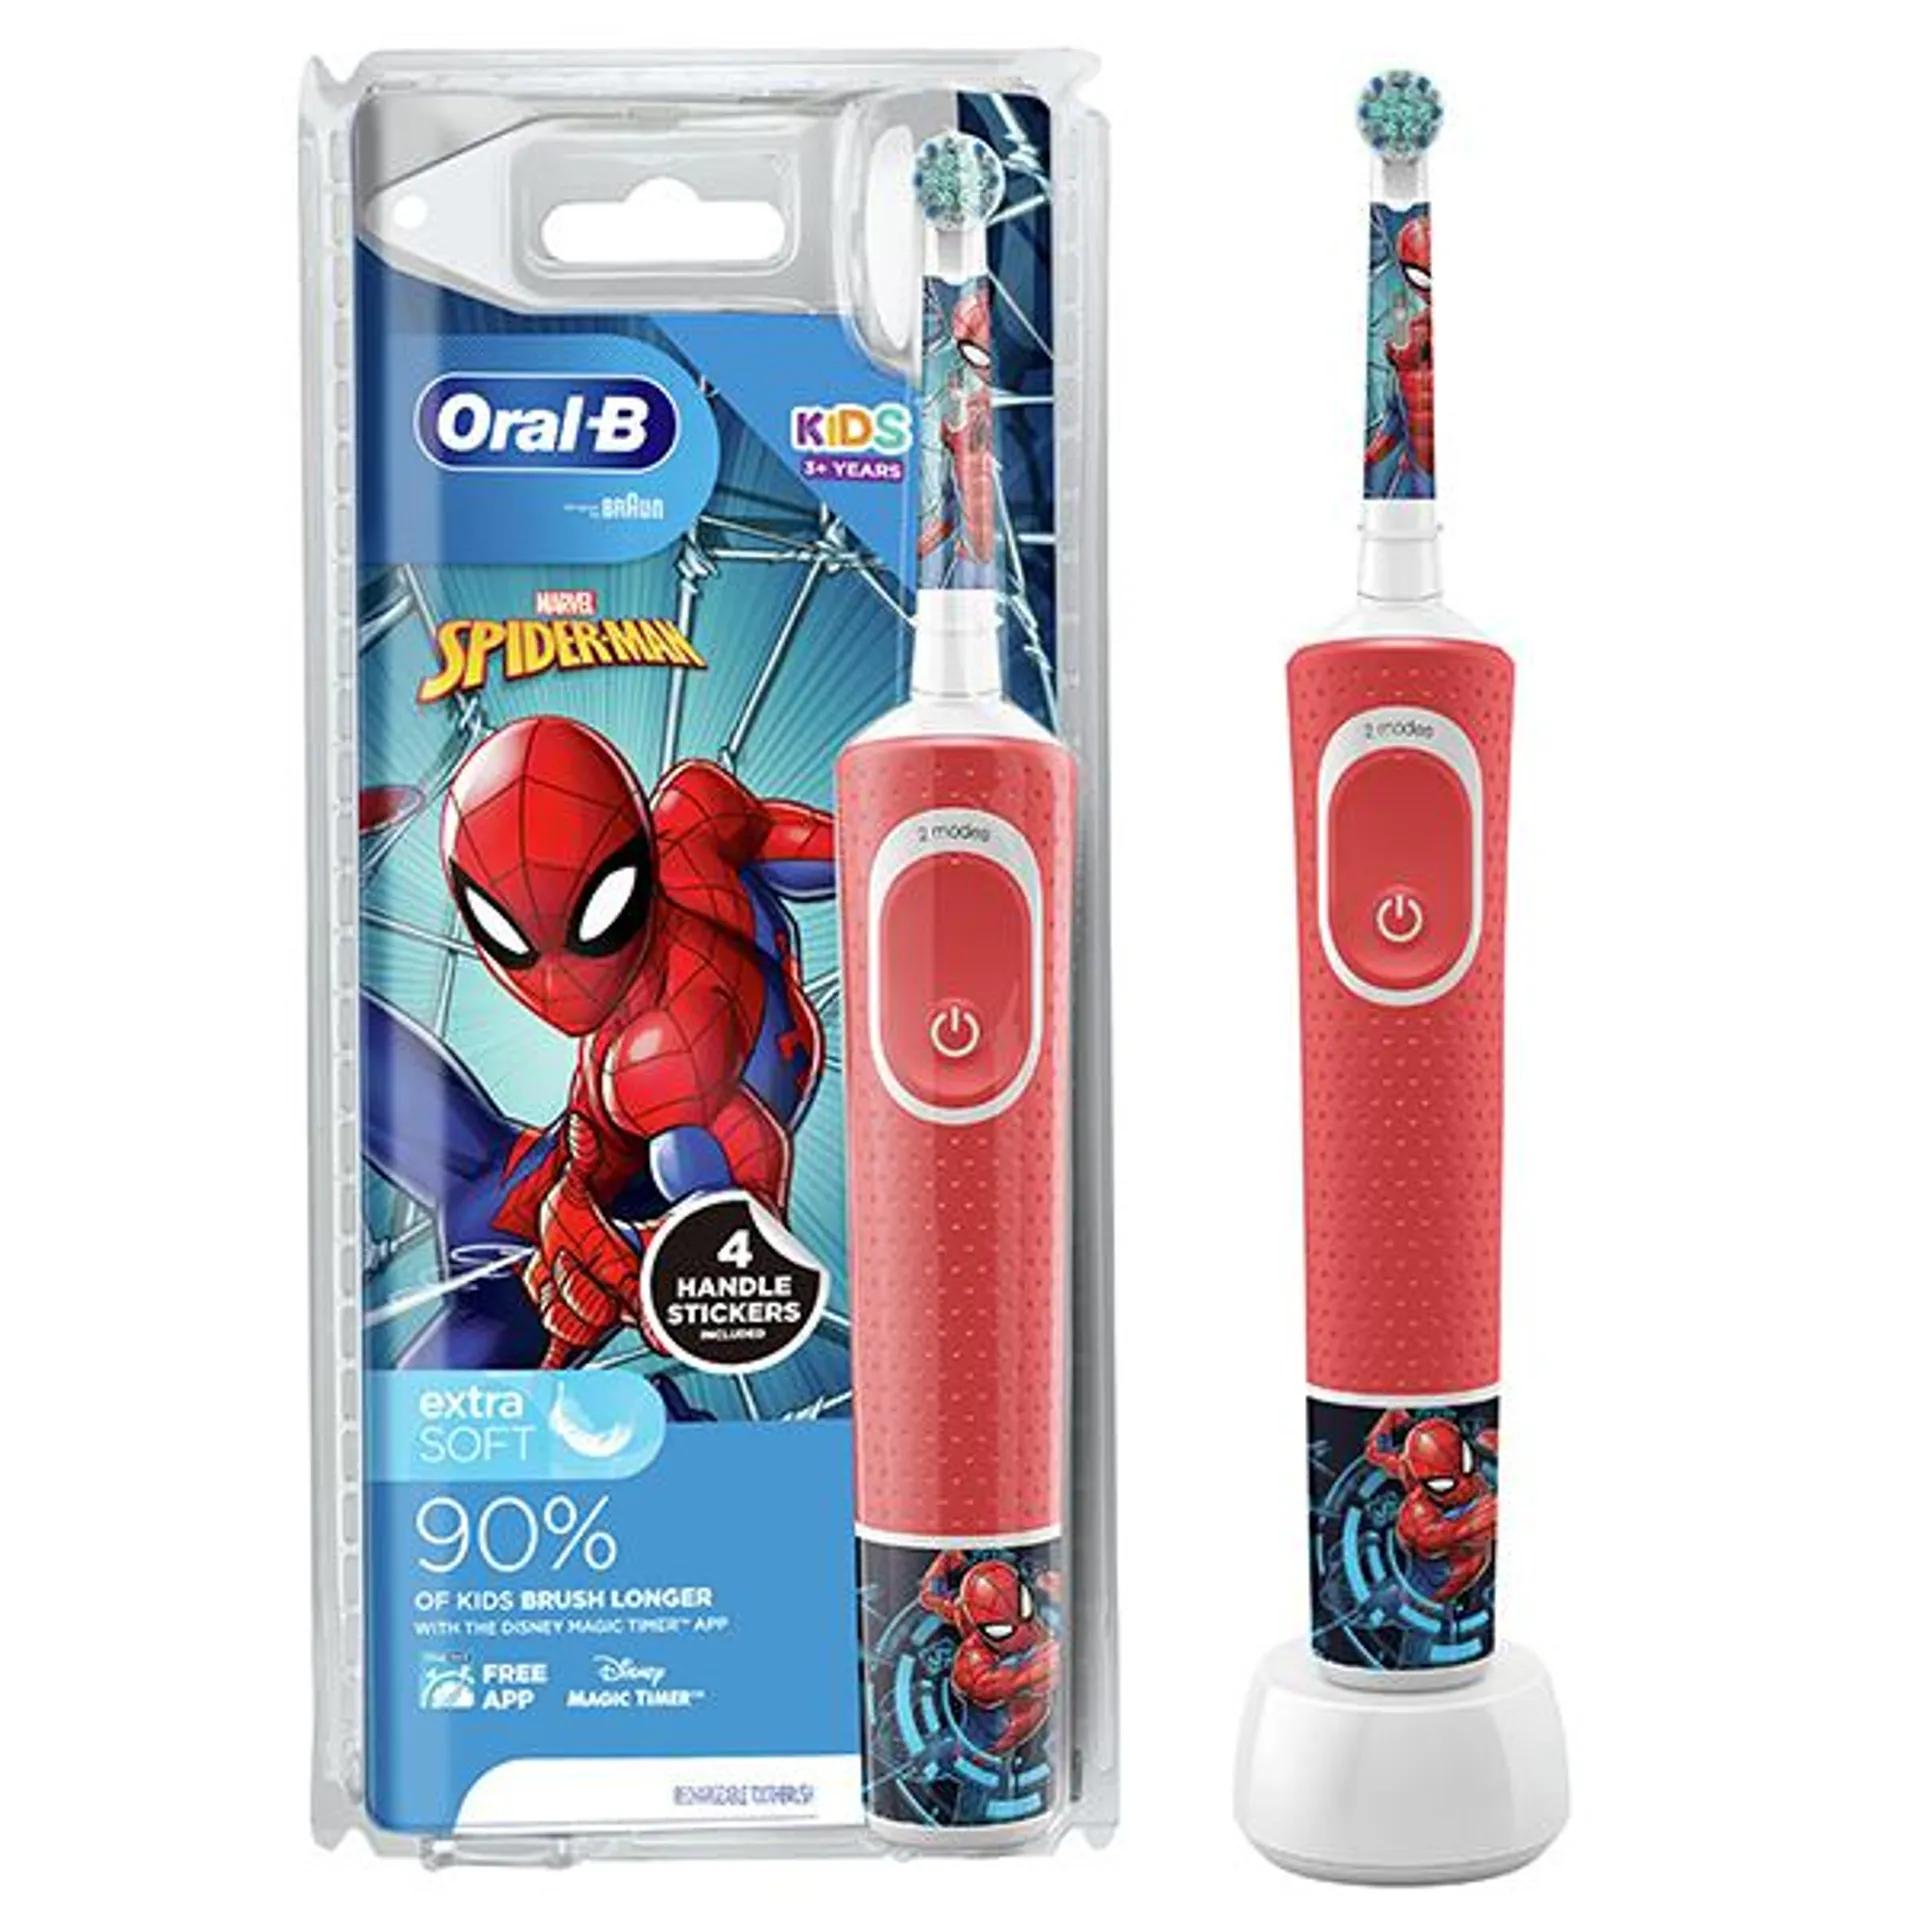 Oral-B Kids Spider-Man Vitality Electric Rechargeable Toothbrush for Age 3+